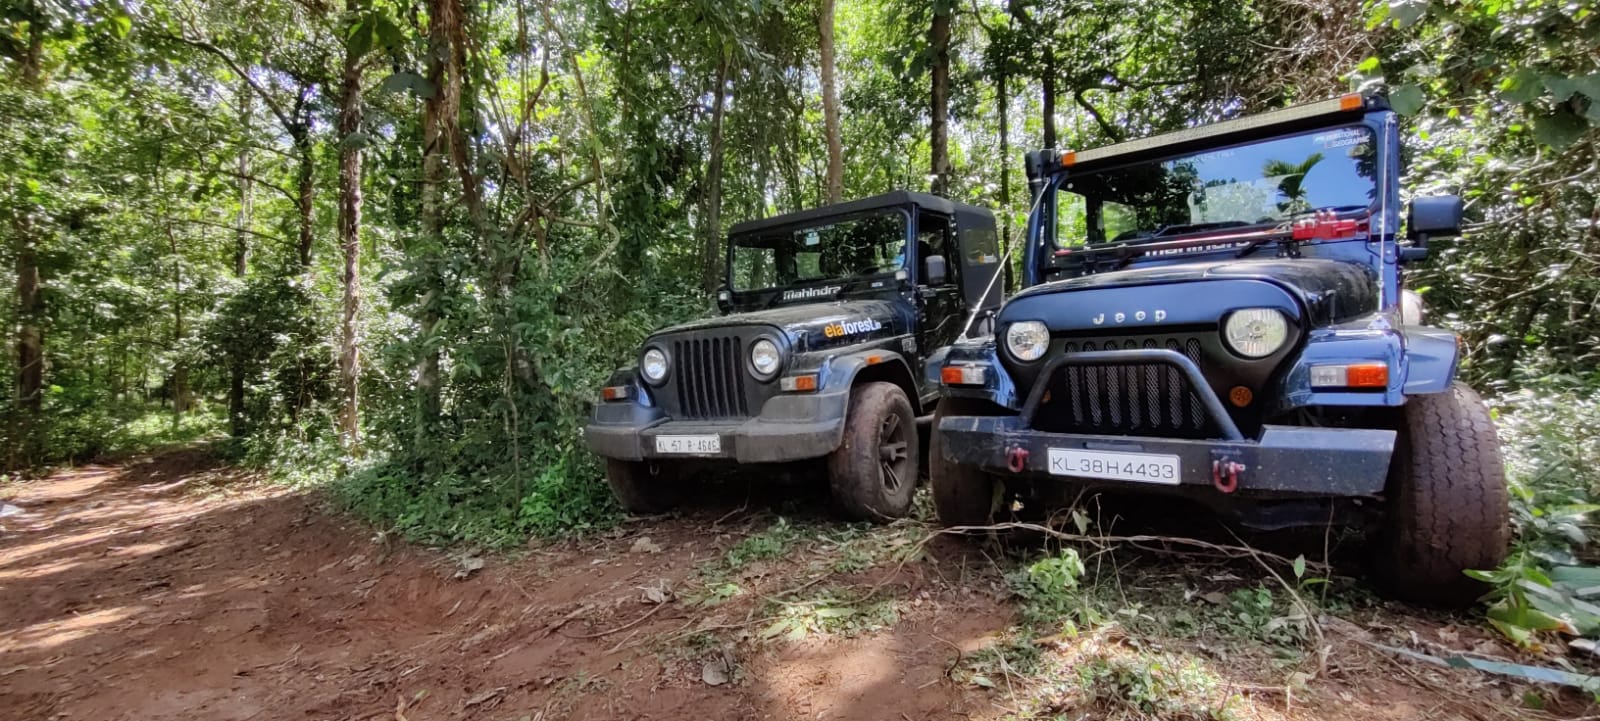 4×4 Vehicle in ela forest